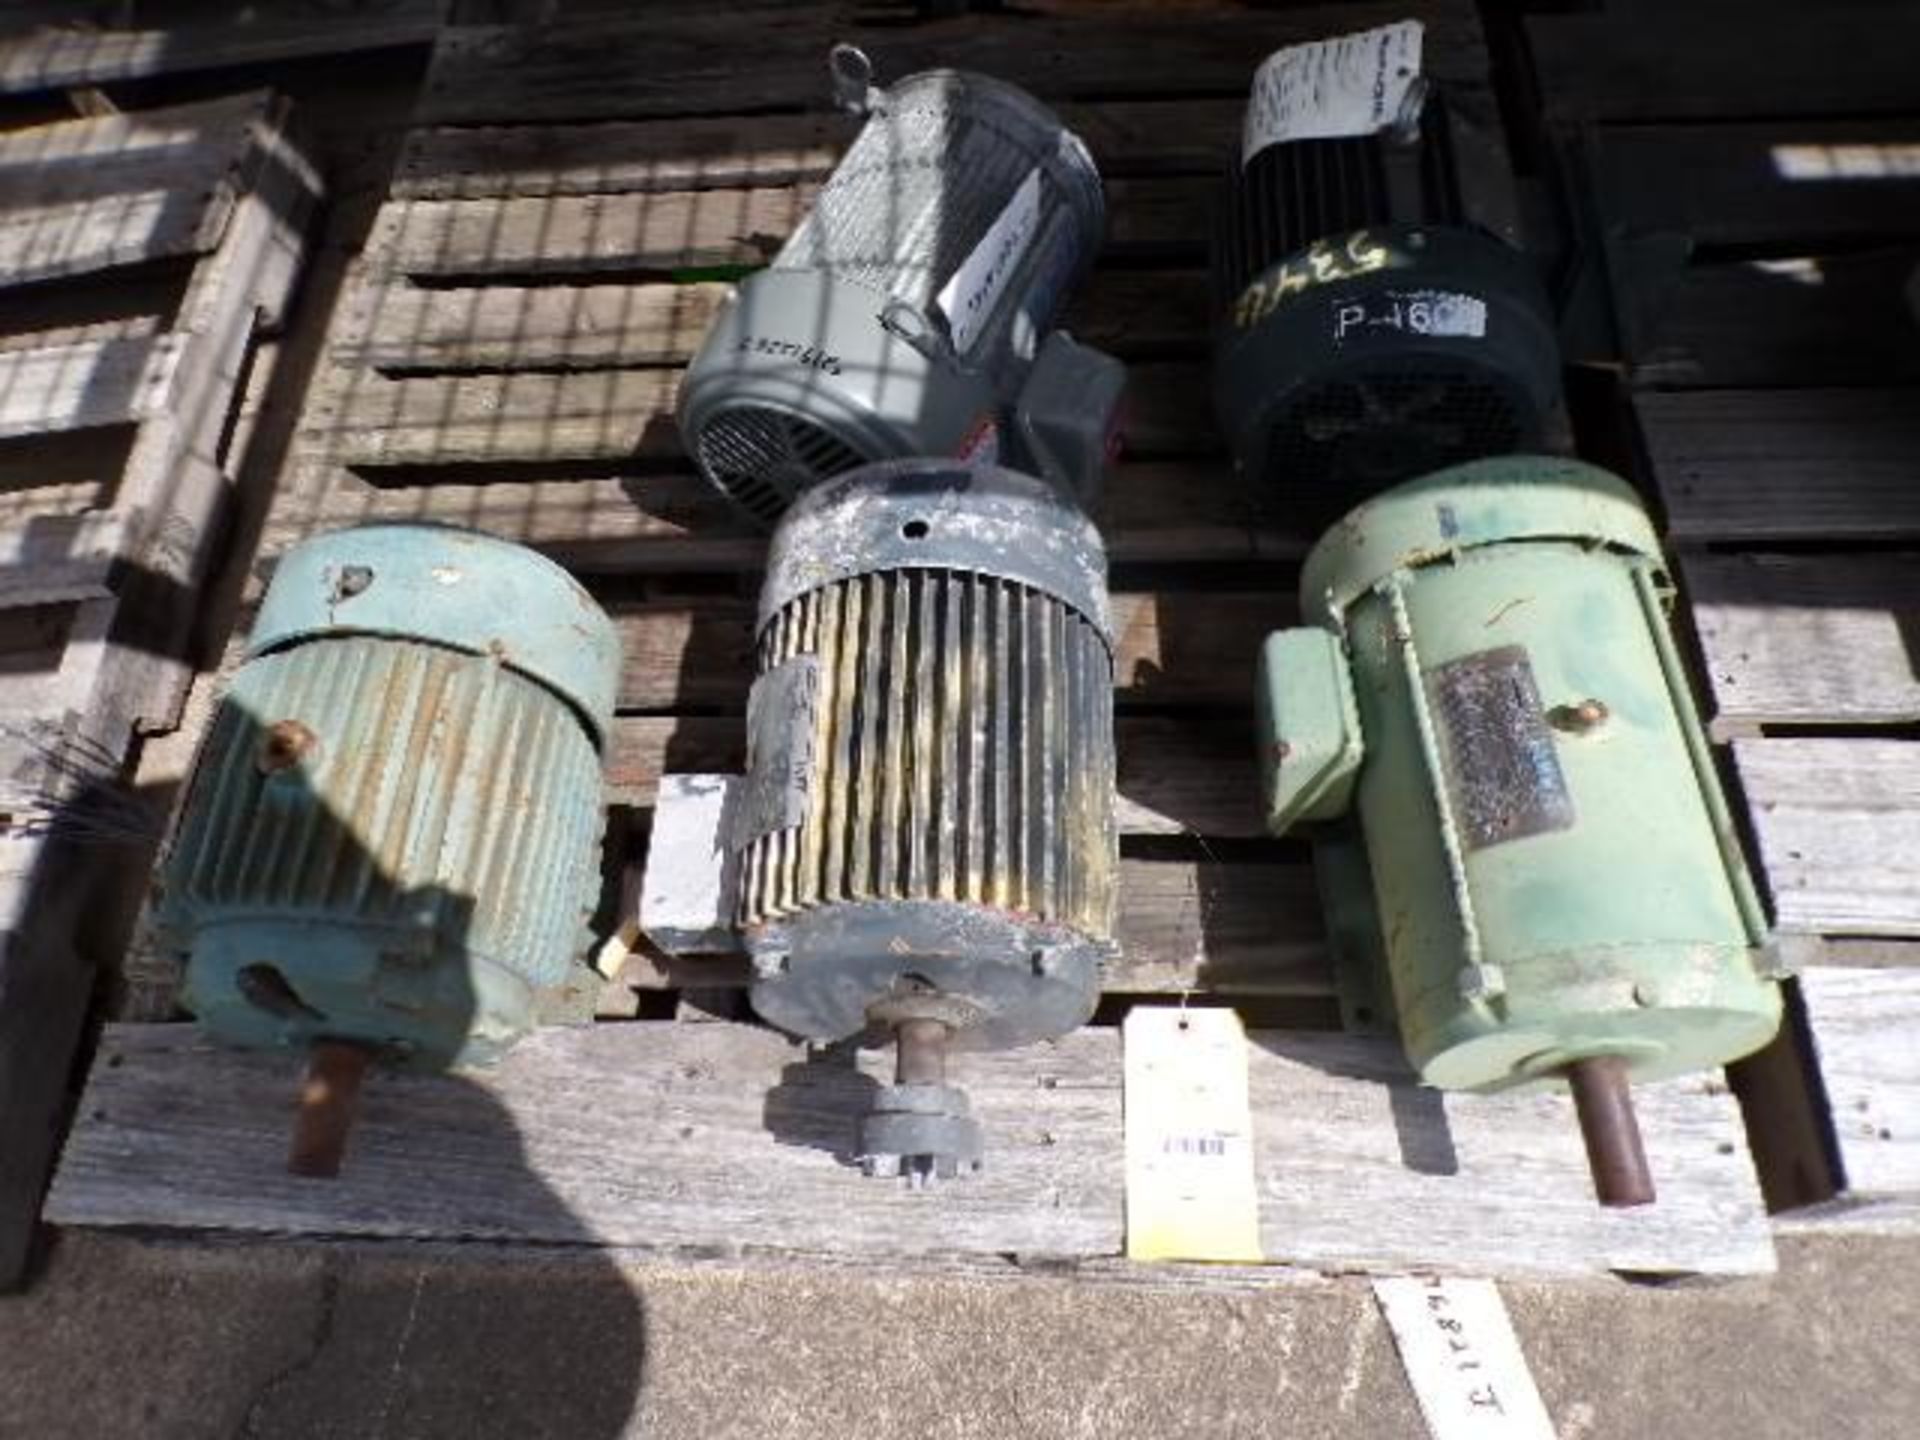 Pallet of Assorted Electric Motors (Used)